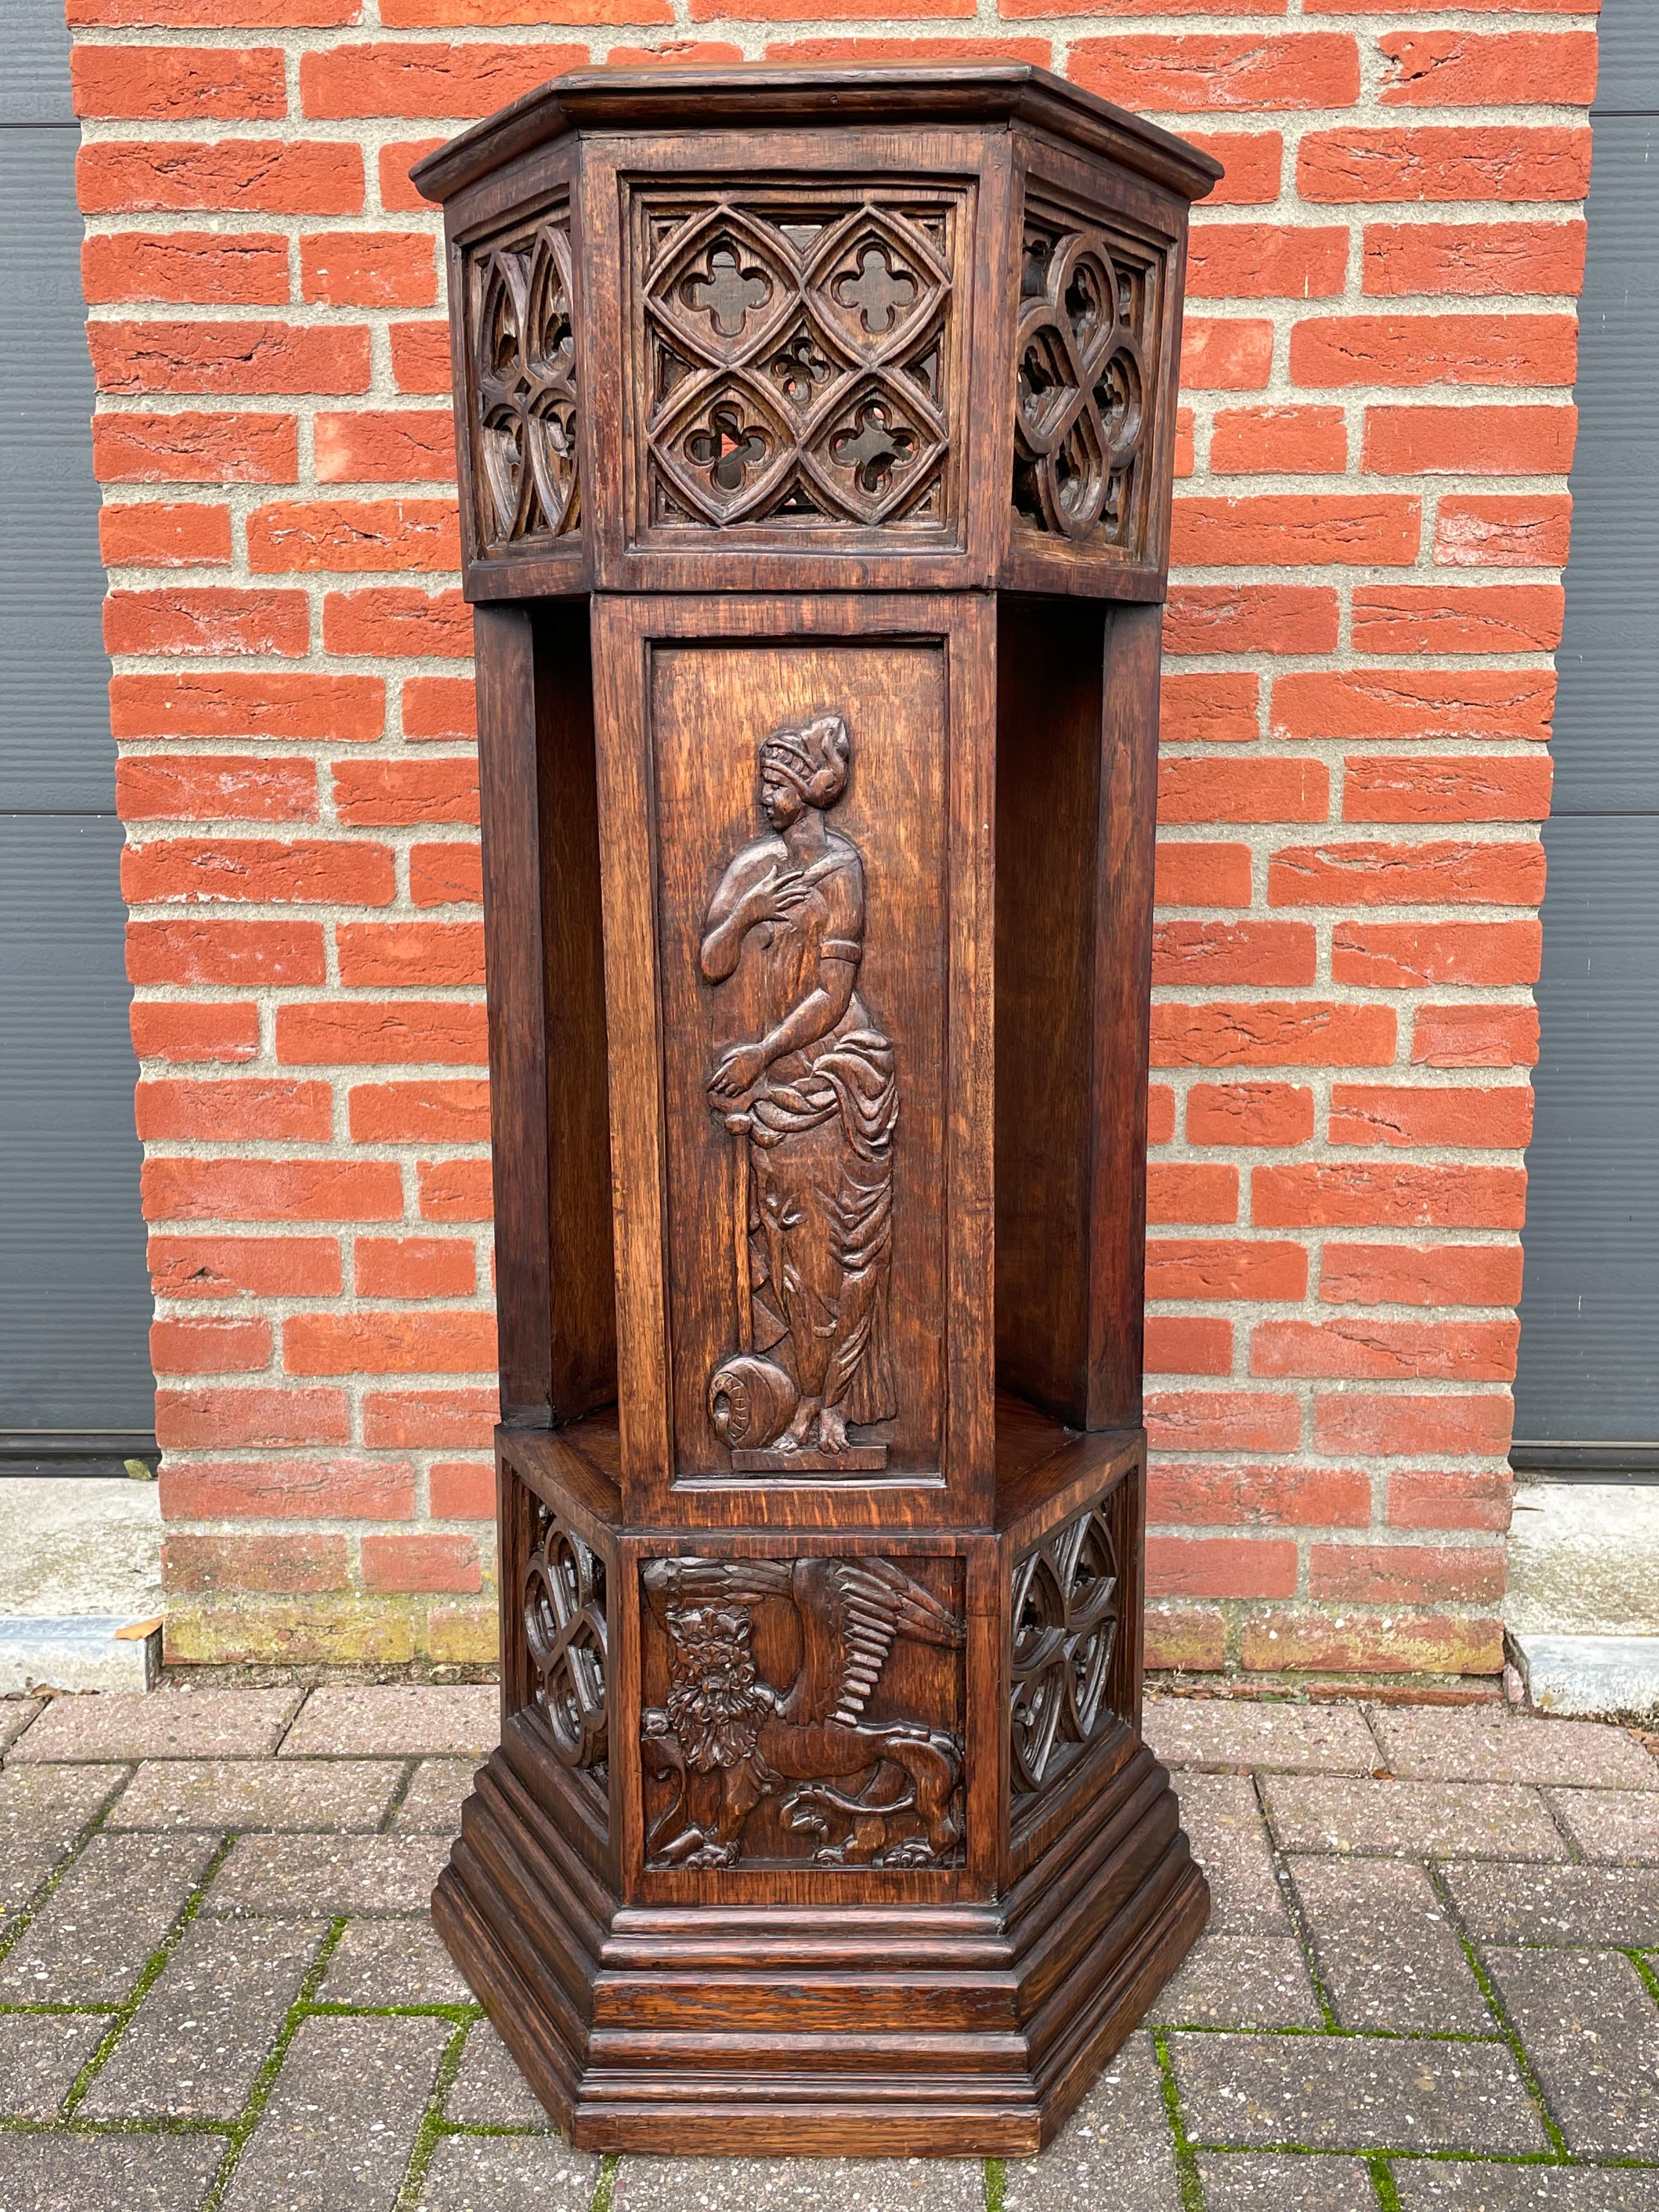 One of a kind and meaningful, Gothic Revival pedestal / planter / candle holder.

Finding unique antiques that are unlike anything we ever saw always makes us feel grateful. When we first saw this large, entirely handcrafted and handcarved column